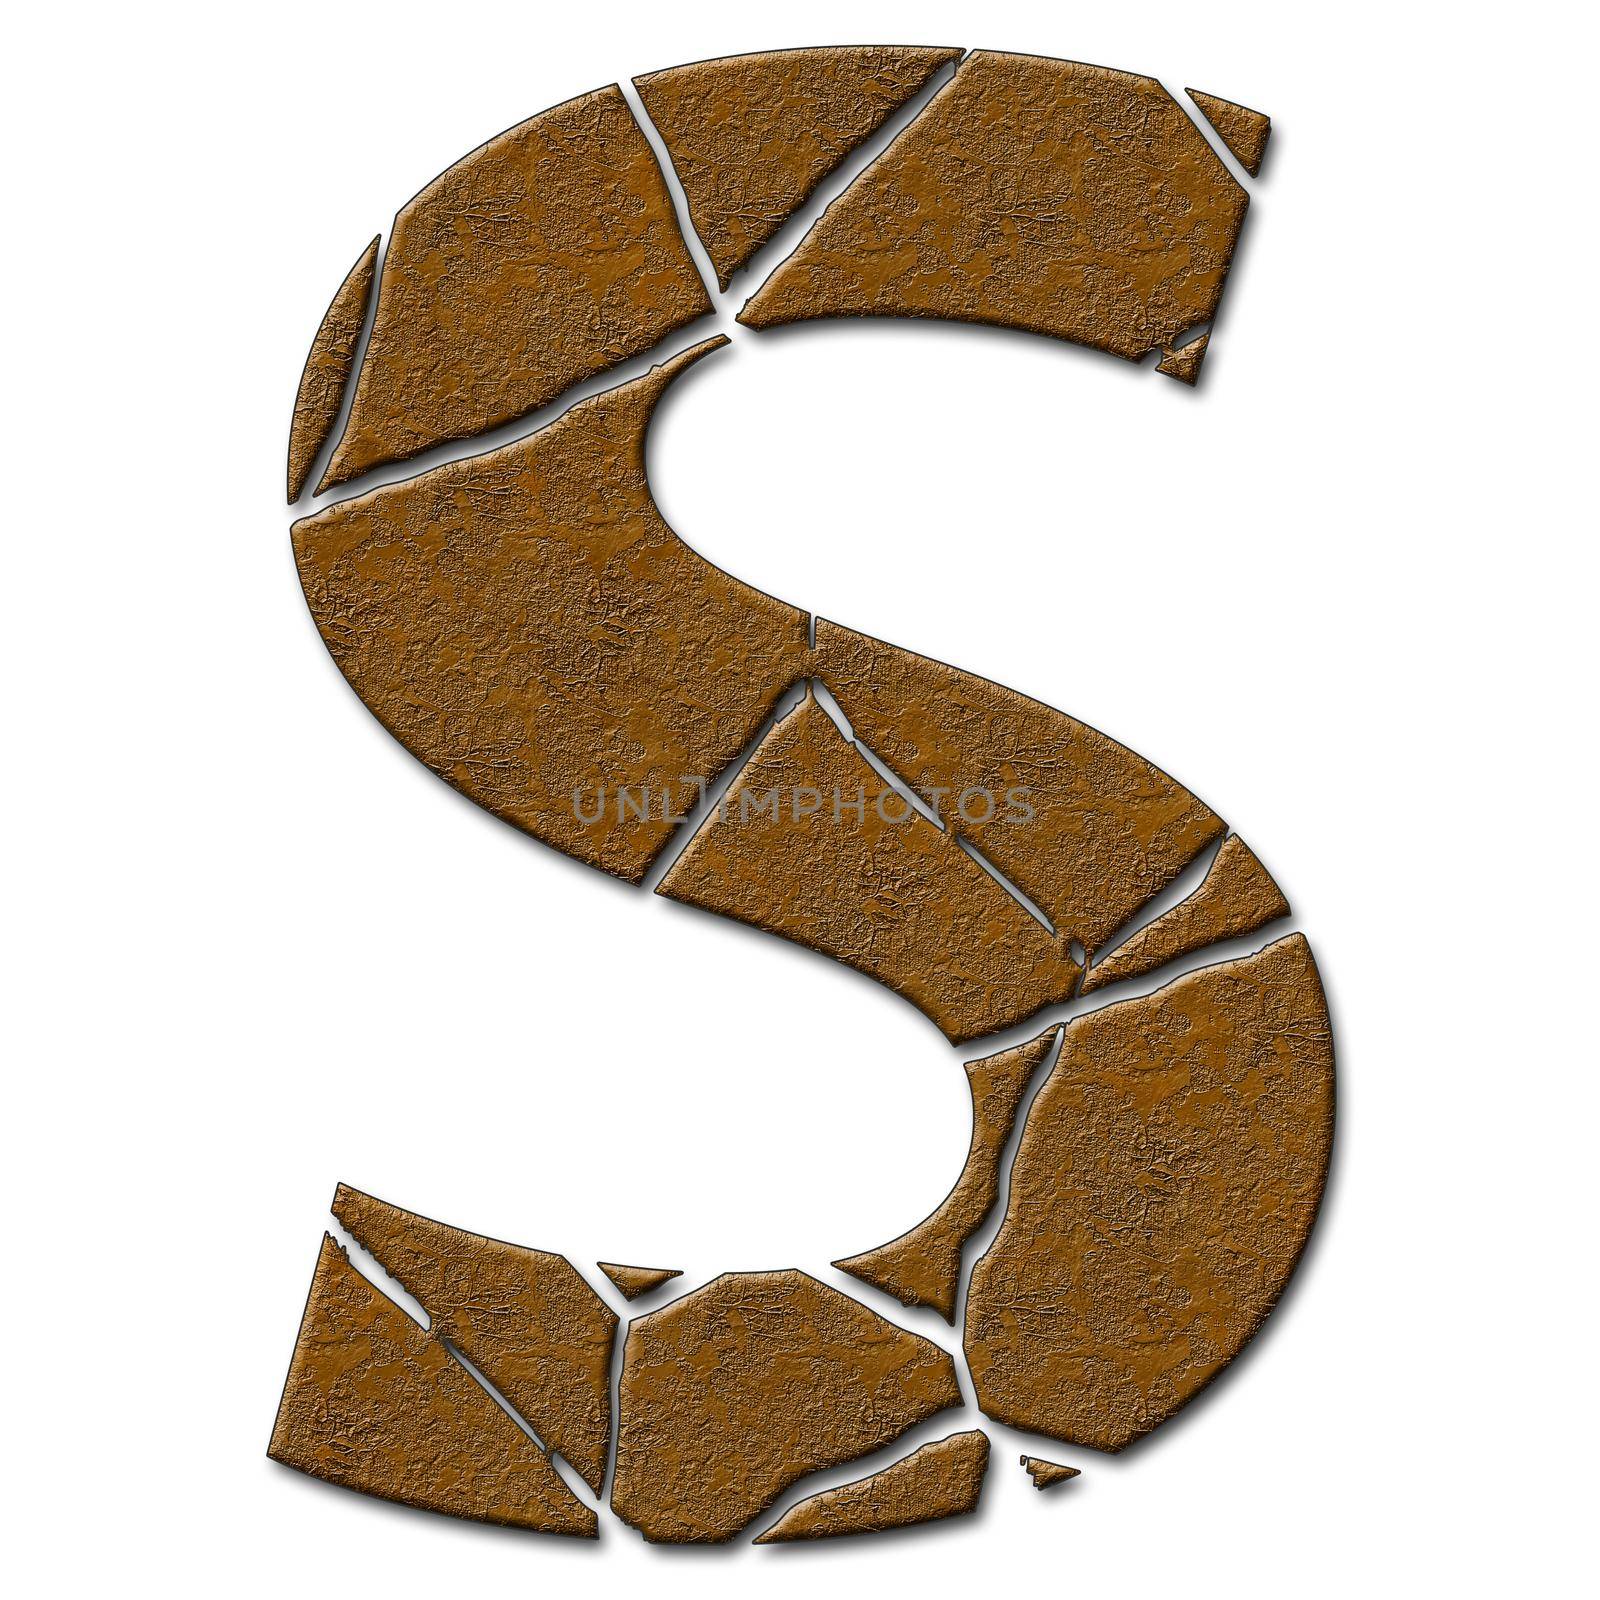 3D render of alphabet capital letter with cracks by stocklady